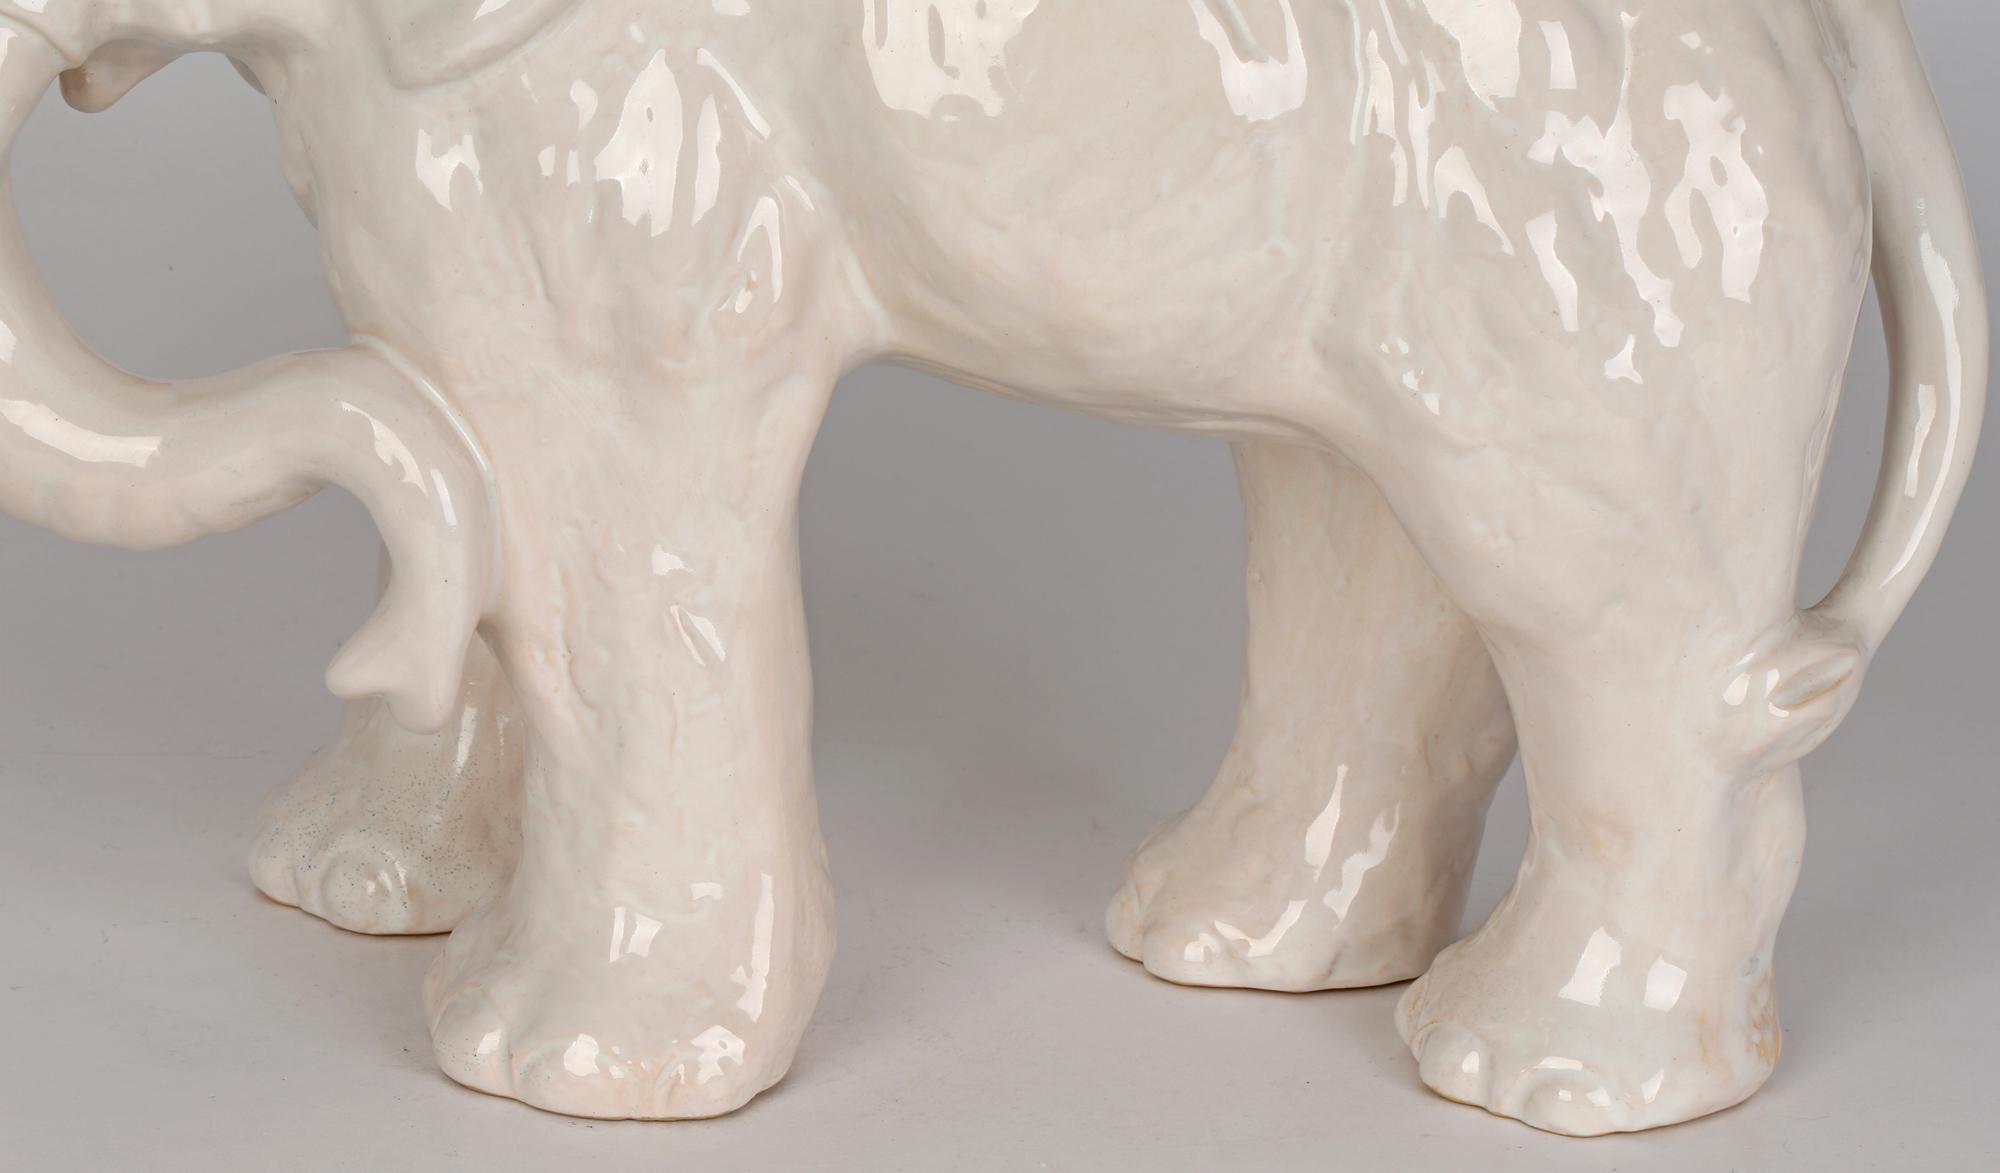 A very impressive and large Danish Art Deco L Hjorth (Bornholm) art pottery elephant decorated in white glazes by Gertrud Kudielka (1896-1984) and dating from around 1930. This large stoneware elephant is naturalistically modelled in a standing pose